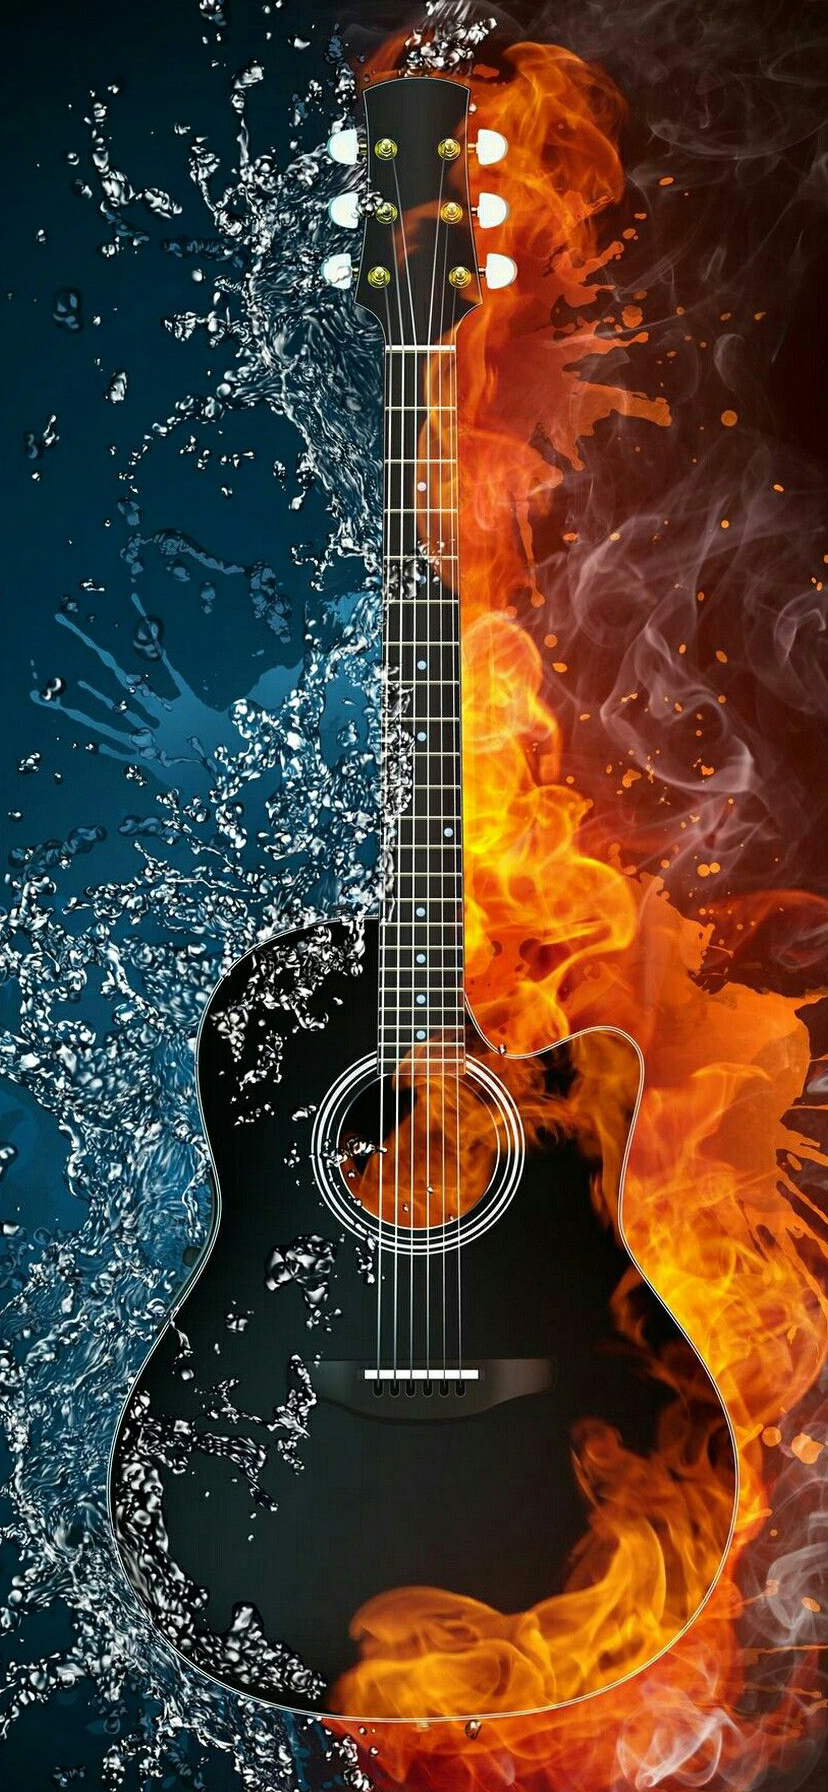 Free iPhone 11 Wallpaper Download 01 of 20 - Guitar Art Picture - HD